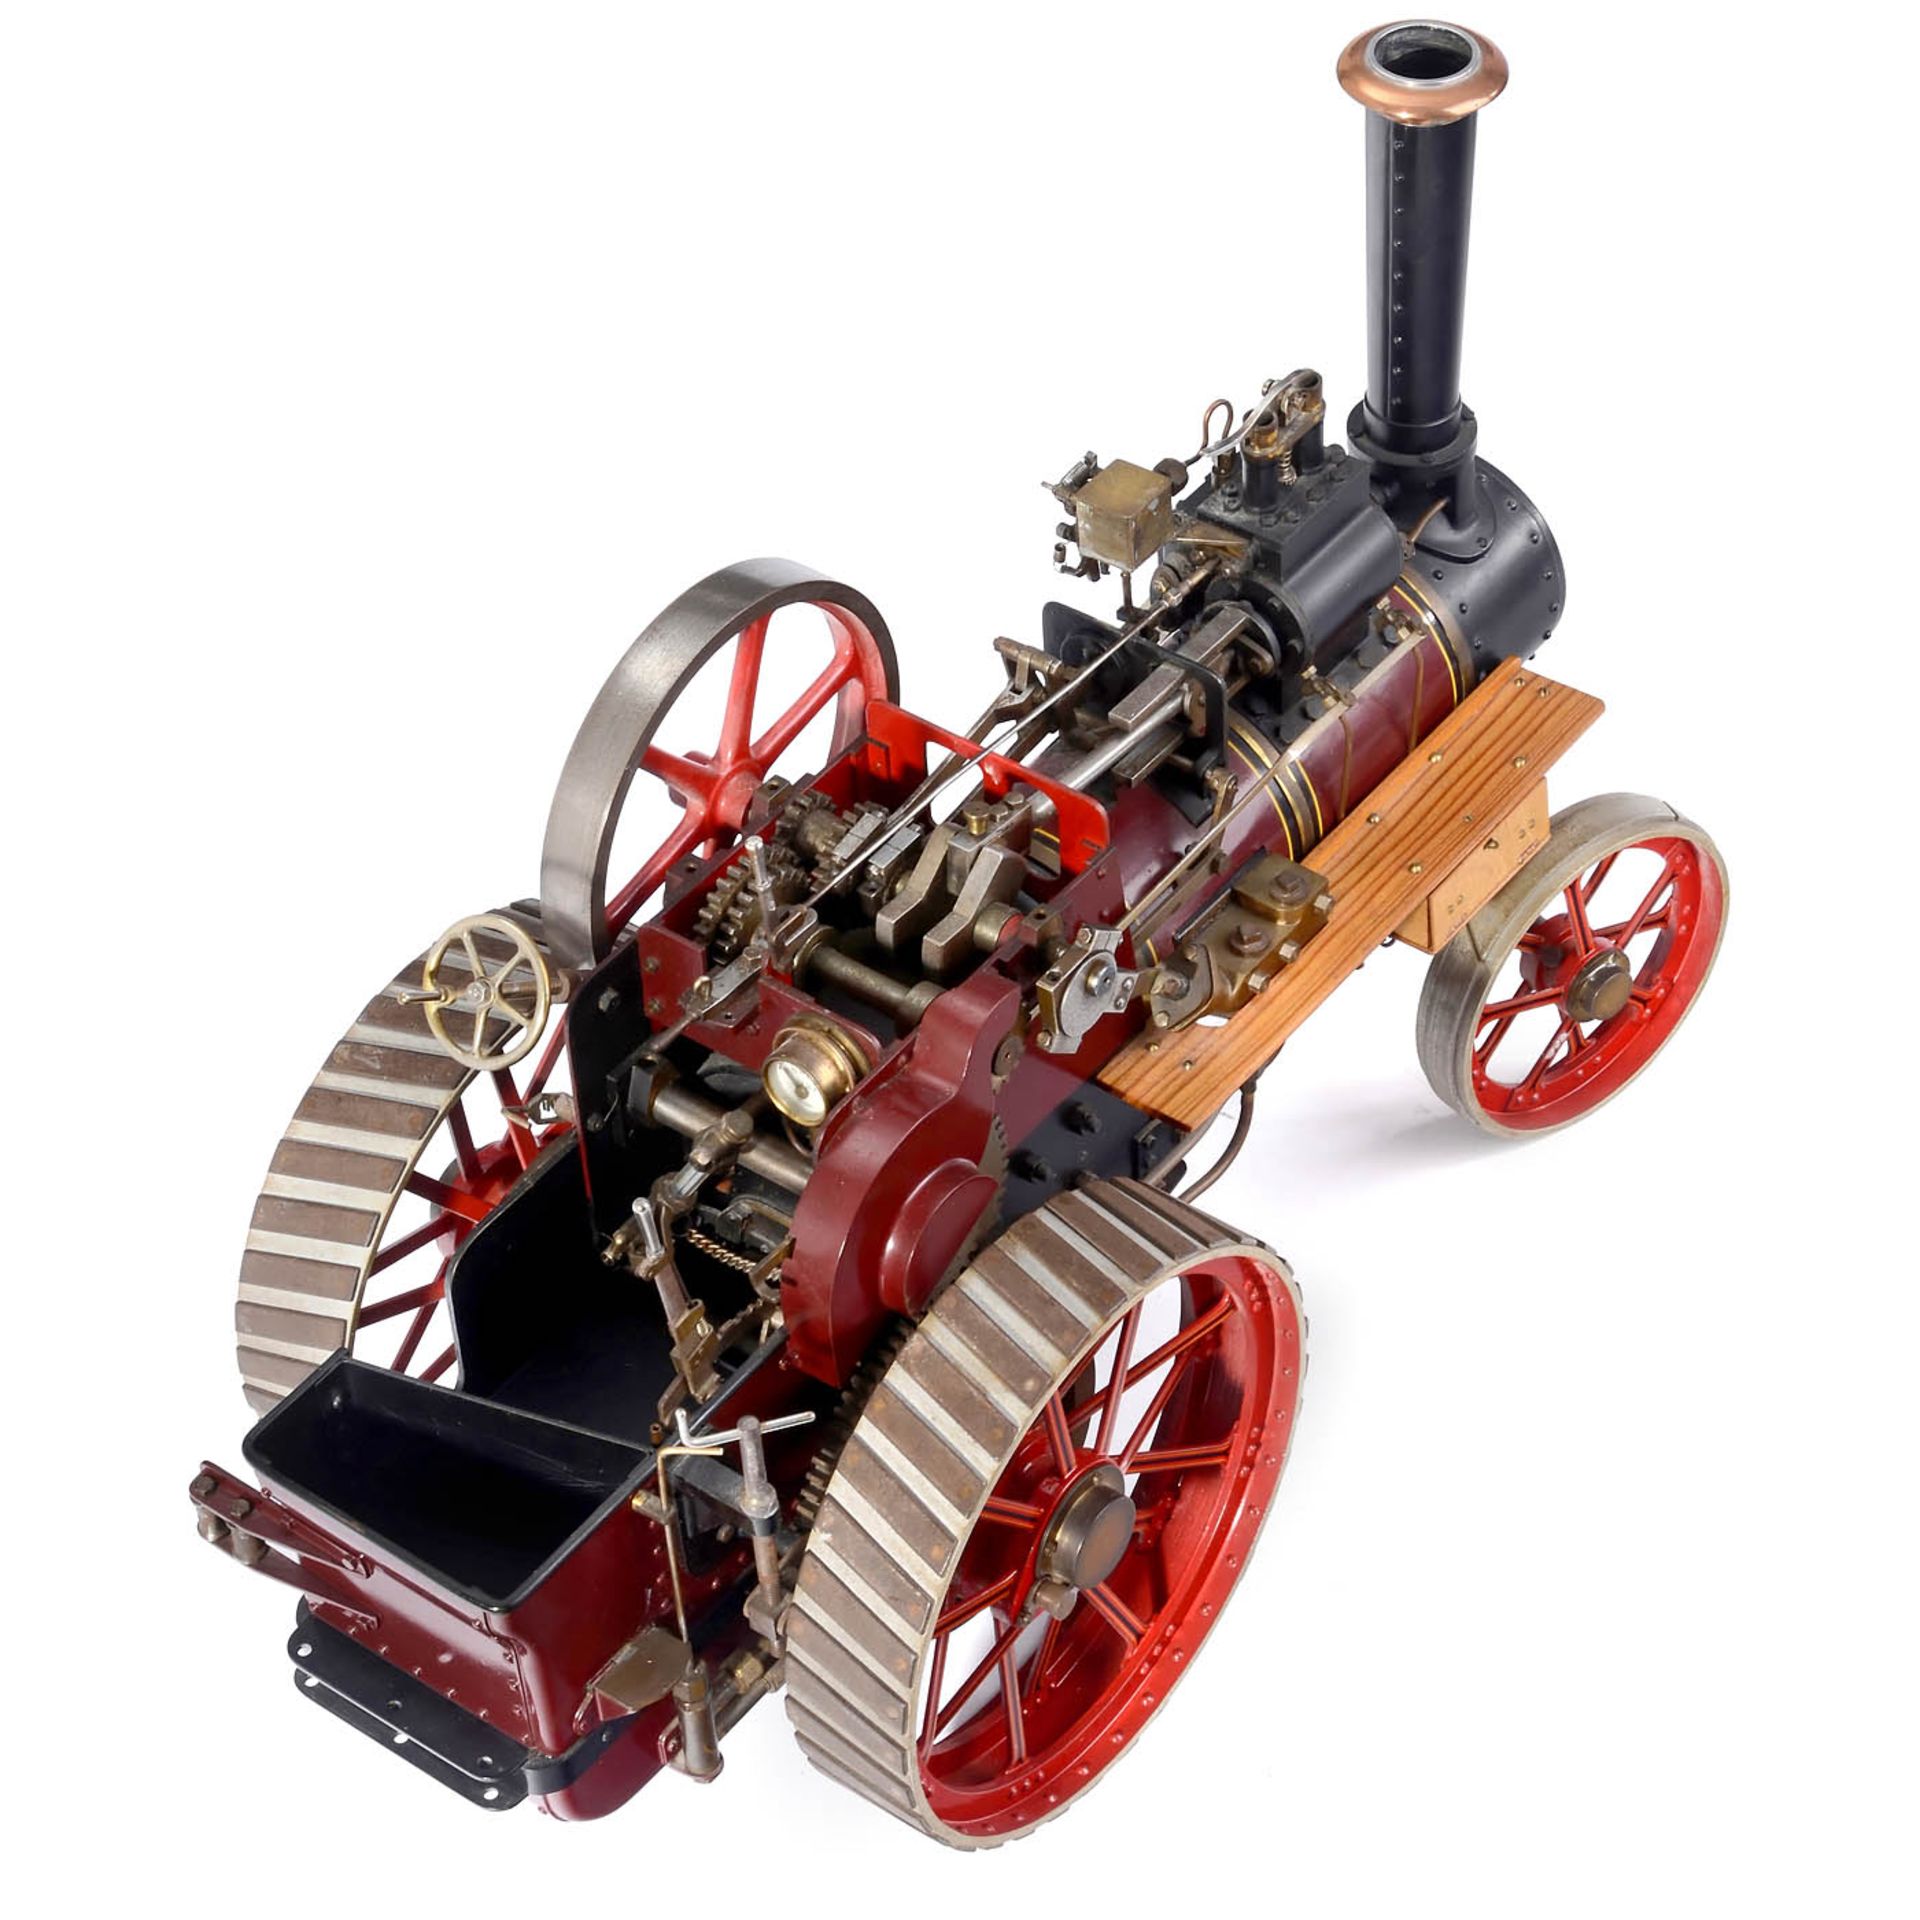 1-Inch Scale Model of a Live-Steam Traction Engine, c. 1980 - Bild 4 aus 5